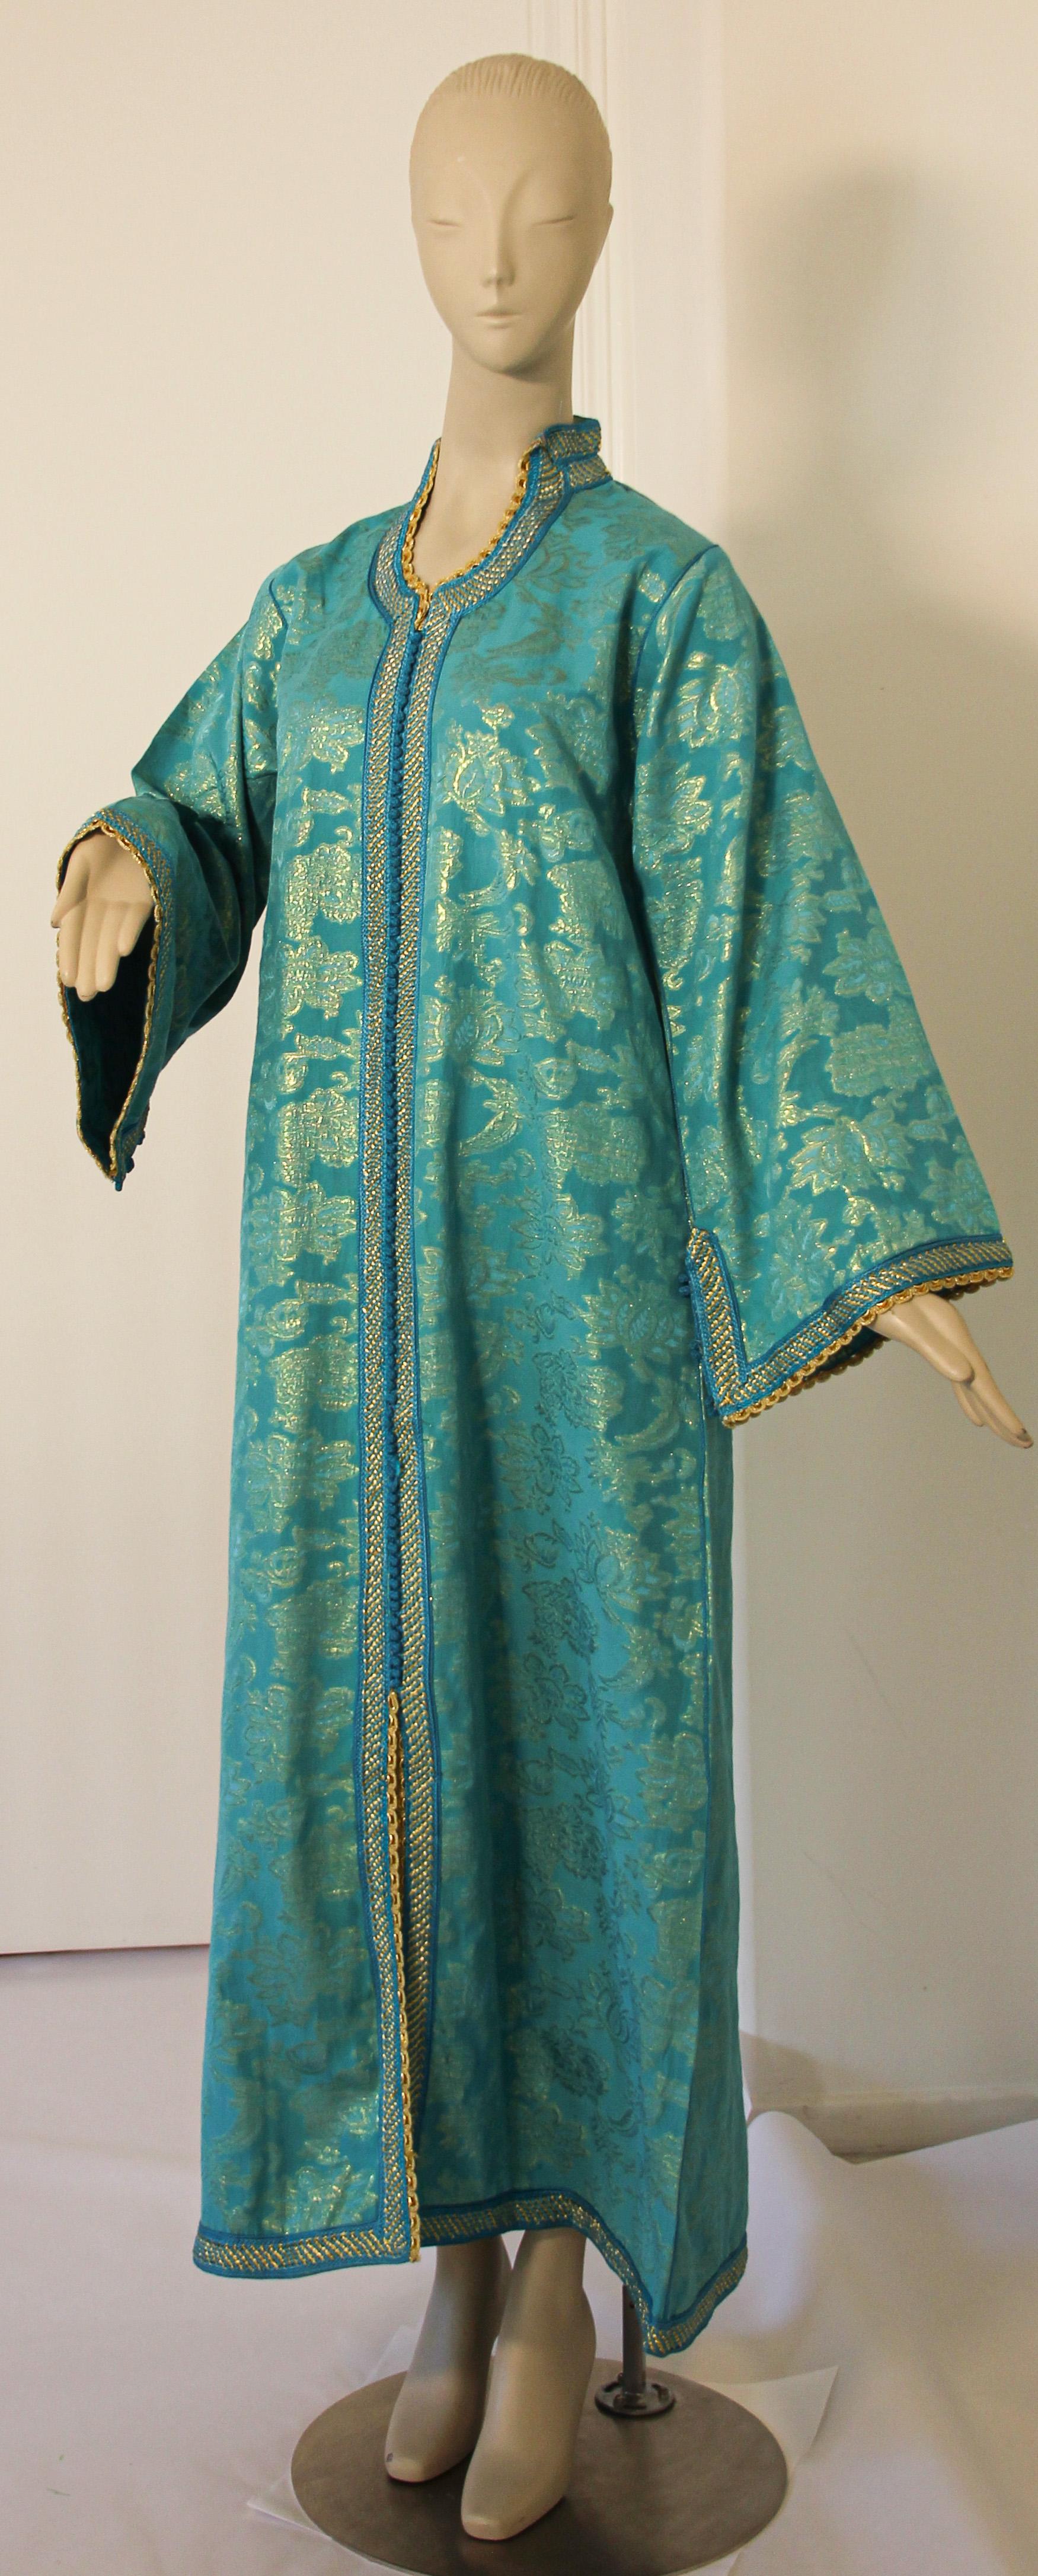 Elegant Moroccan caftan turquoise and silver lame metallic floral brocade,
This is an exceptional example of Moroccan fashion design dating to the 1970s, 
Handcrafted in Morocco and tailored for a relaxed fit with wide sleeves, It is made in the